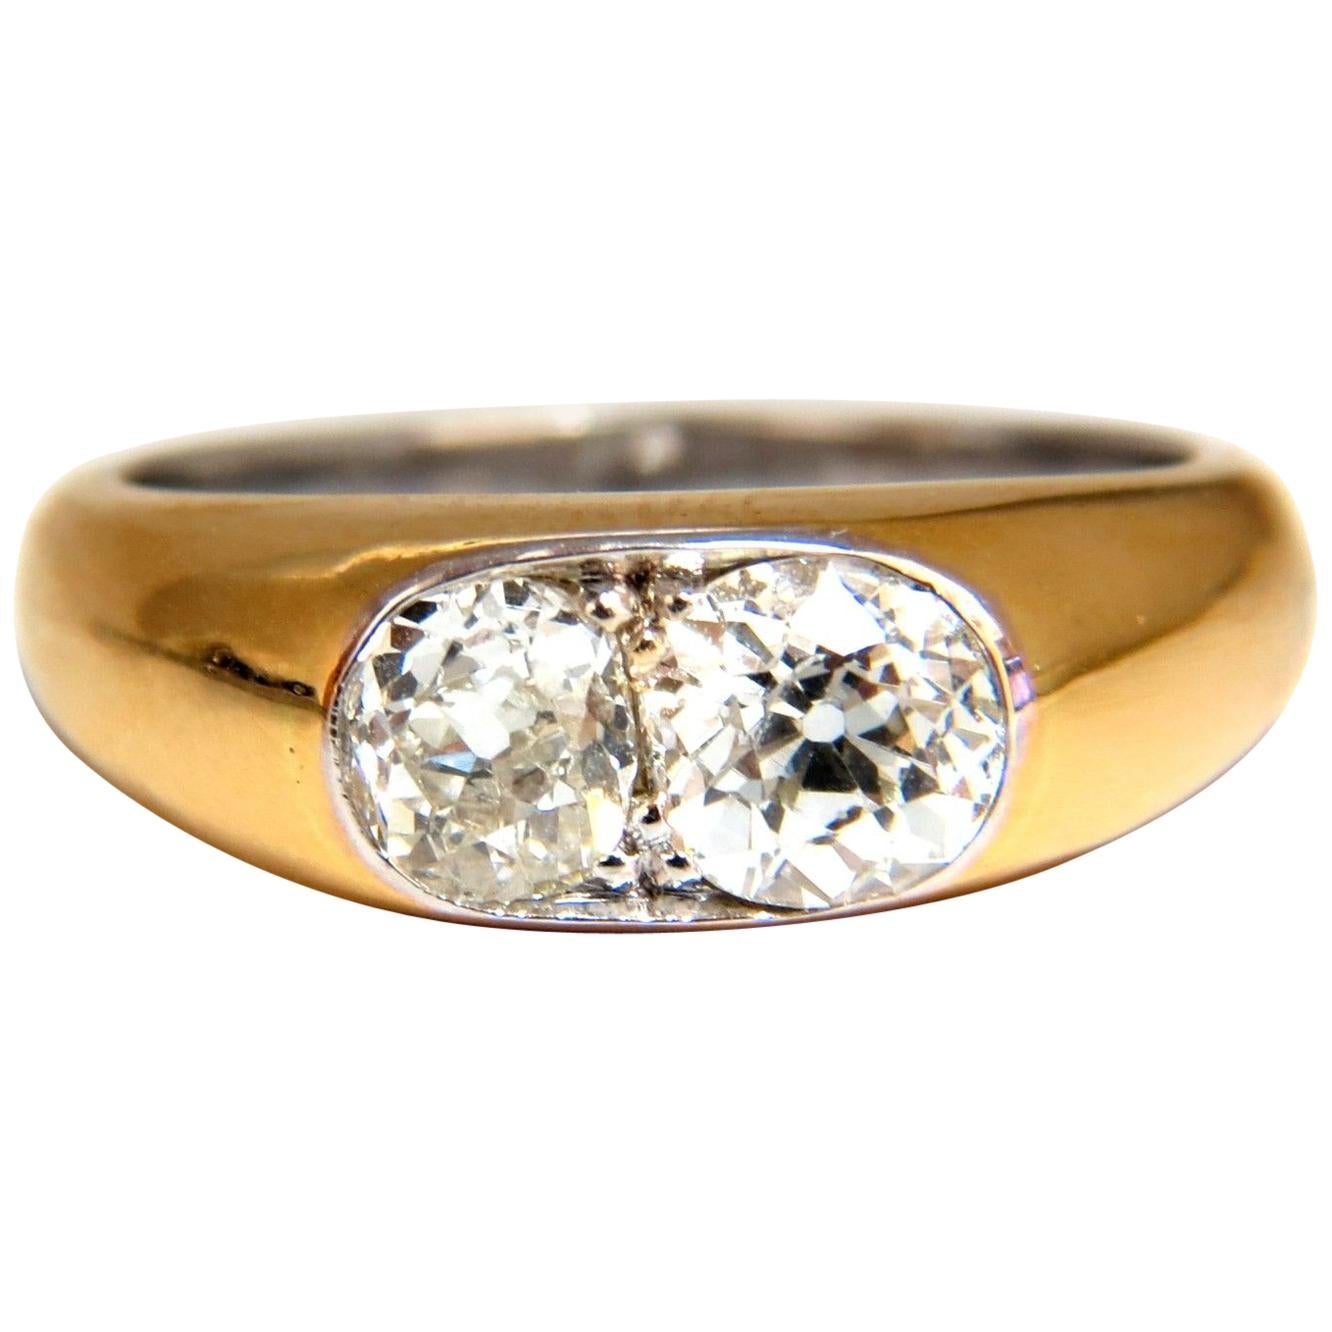 1.43 Carat Natural Old Mine Cut Diamonds Twin Solitaire Ring